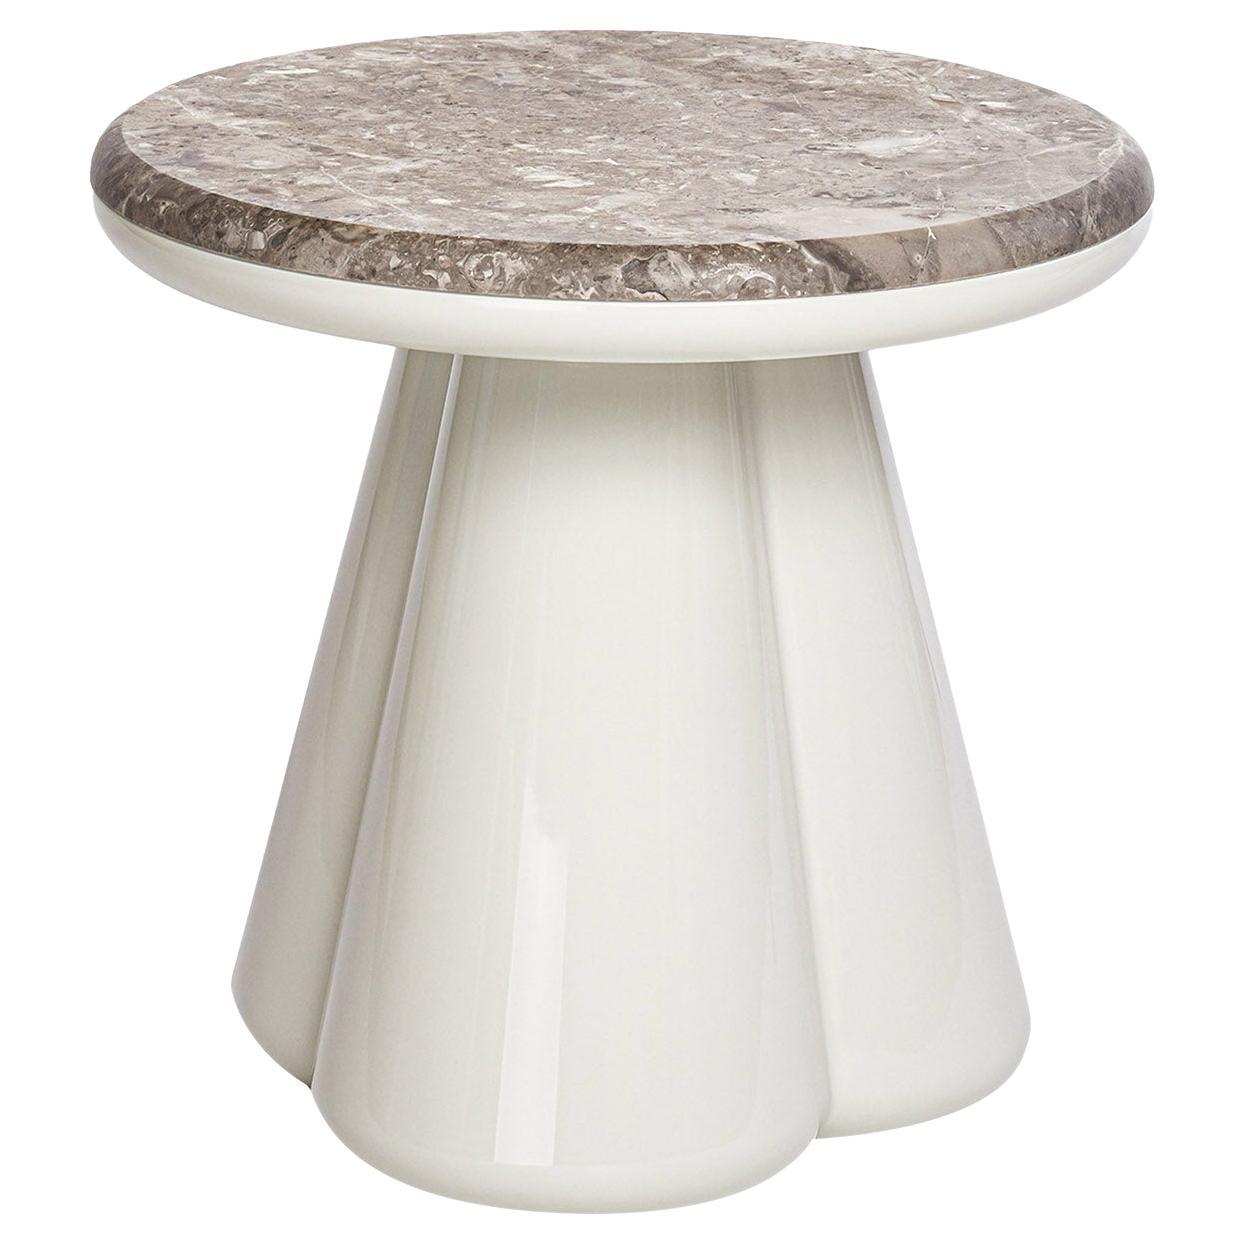 Anodo White Side Table #1 For Sale